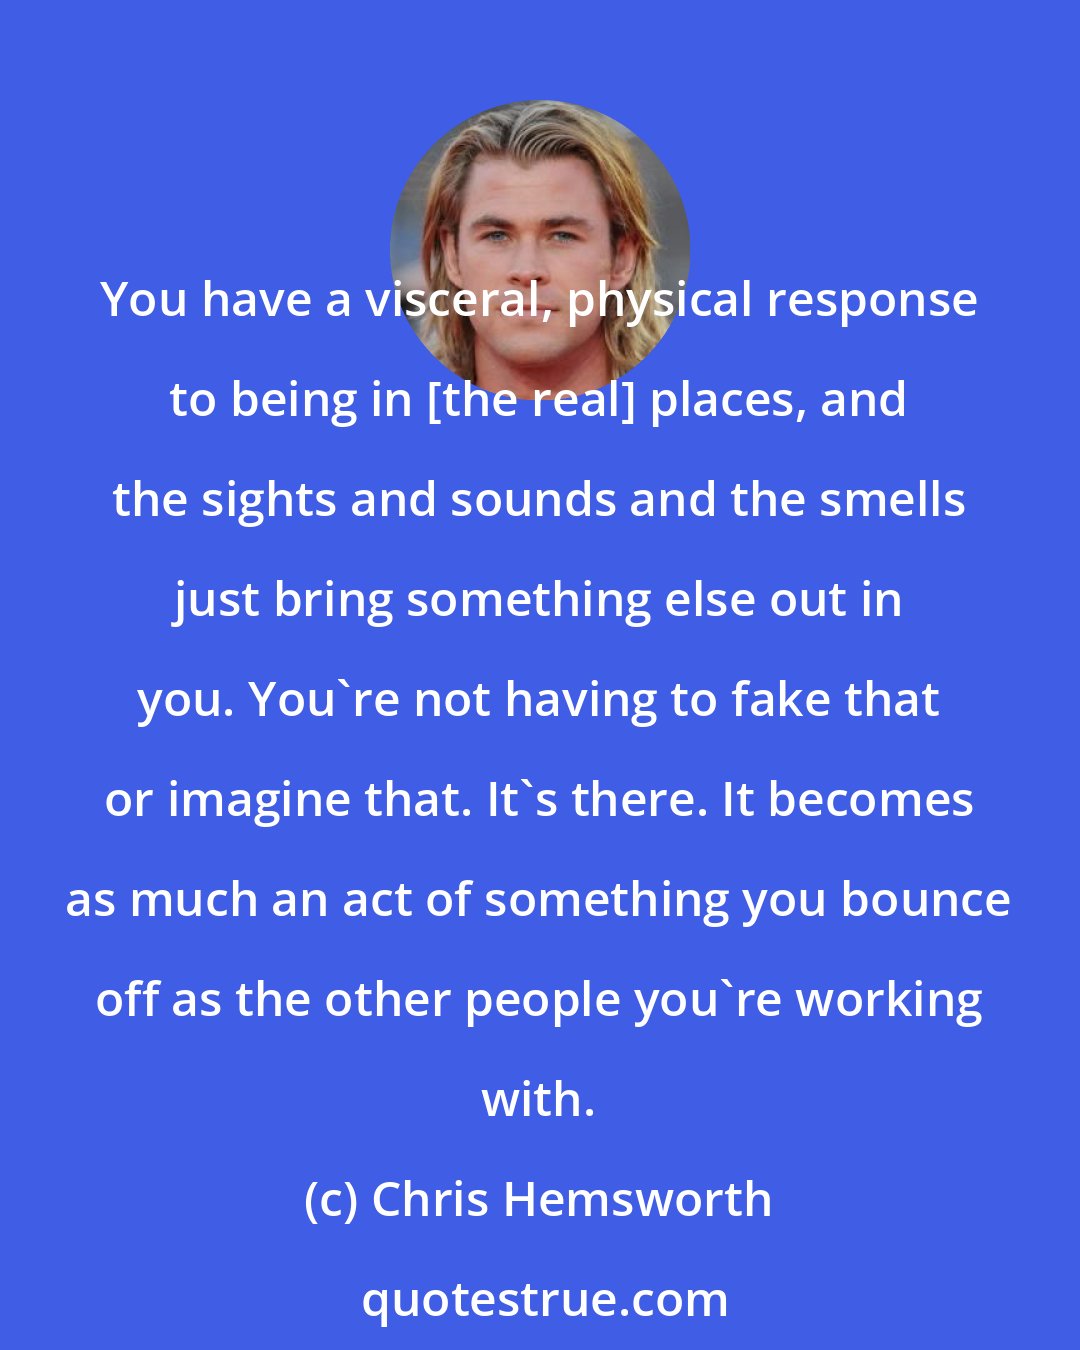 Chris Hemsworth: You have a visceral, physical response to being in [the real] places, and the sights and sounds and the smells just bring something else out in you. You're not having to fake that or imagine that. It's there. It becomes as much an act of something you bounce off as the other people you're working with.